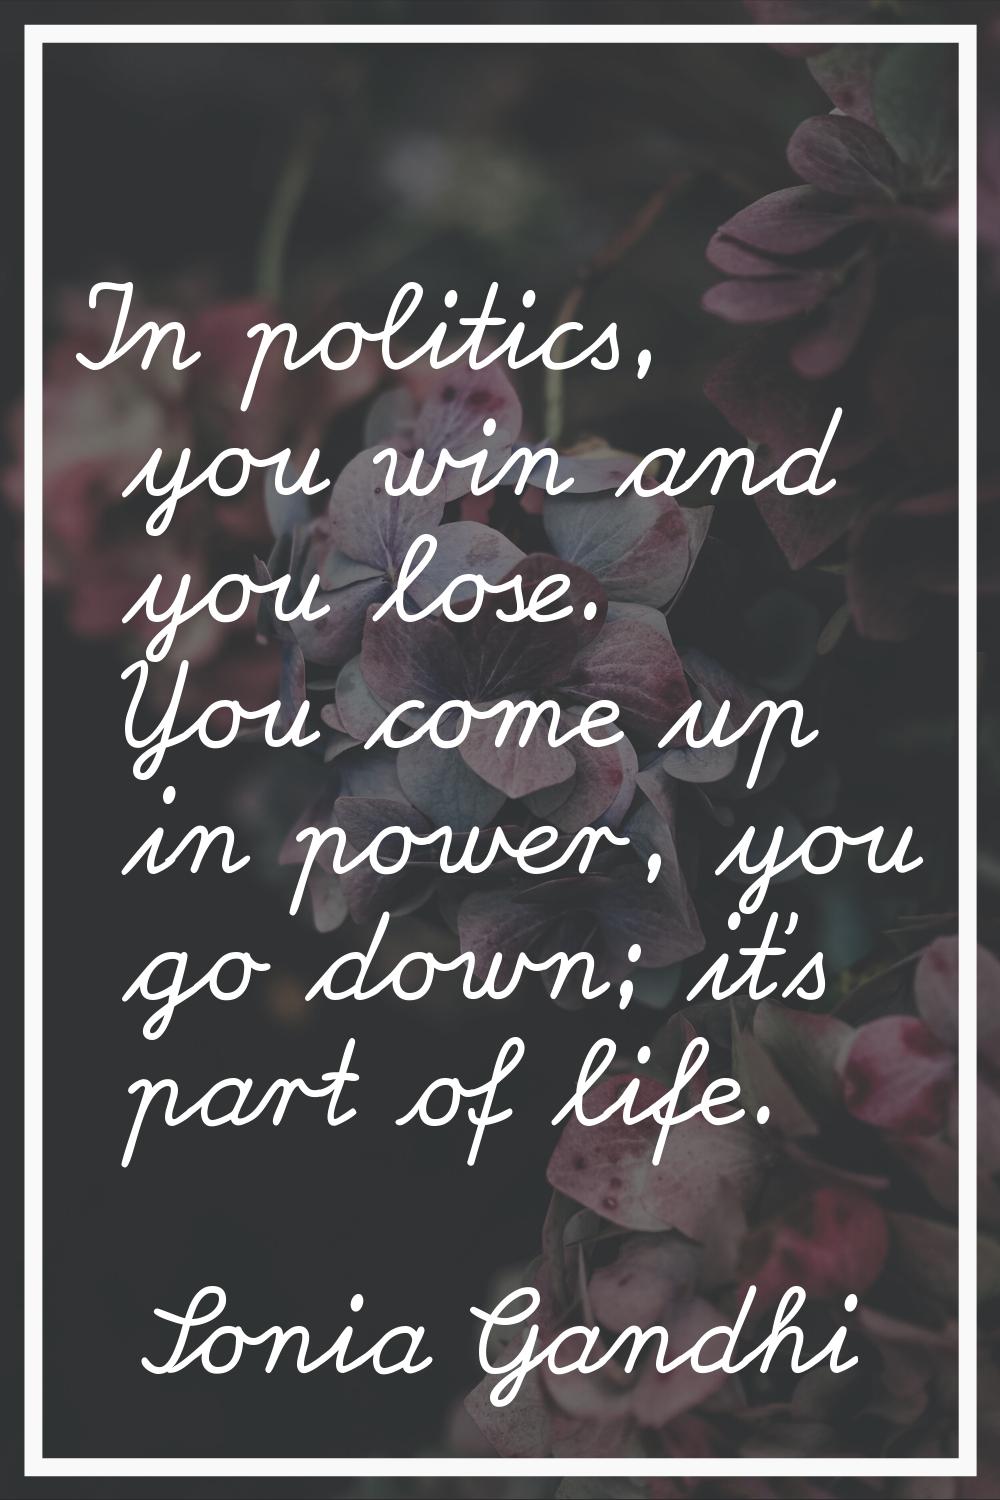 In politics, you win and you lose. You come up in power, you go down; it's part of life.